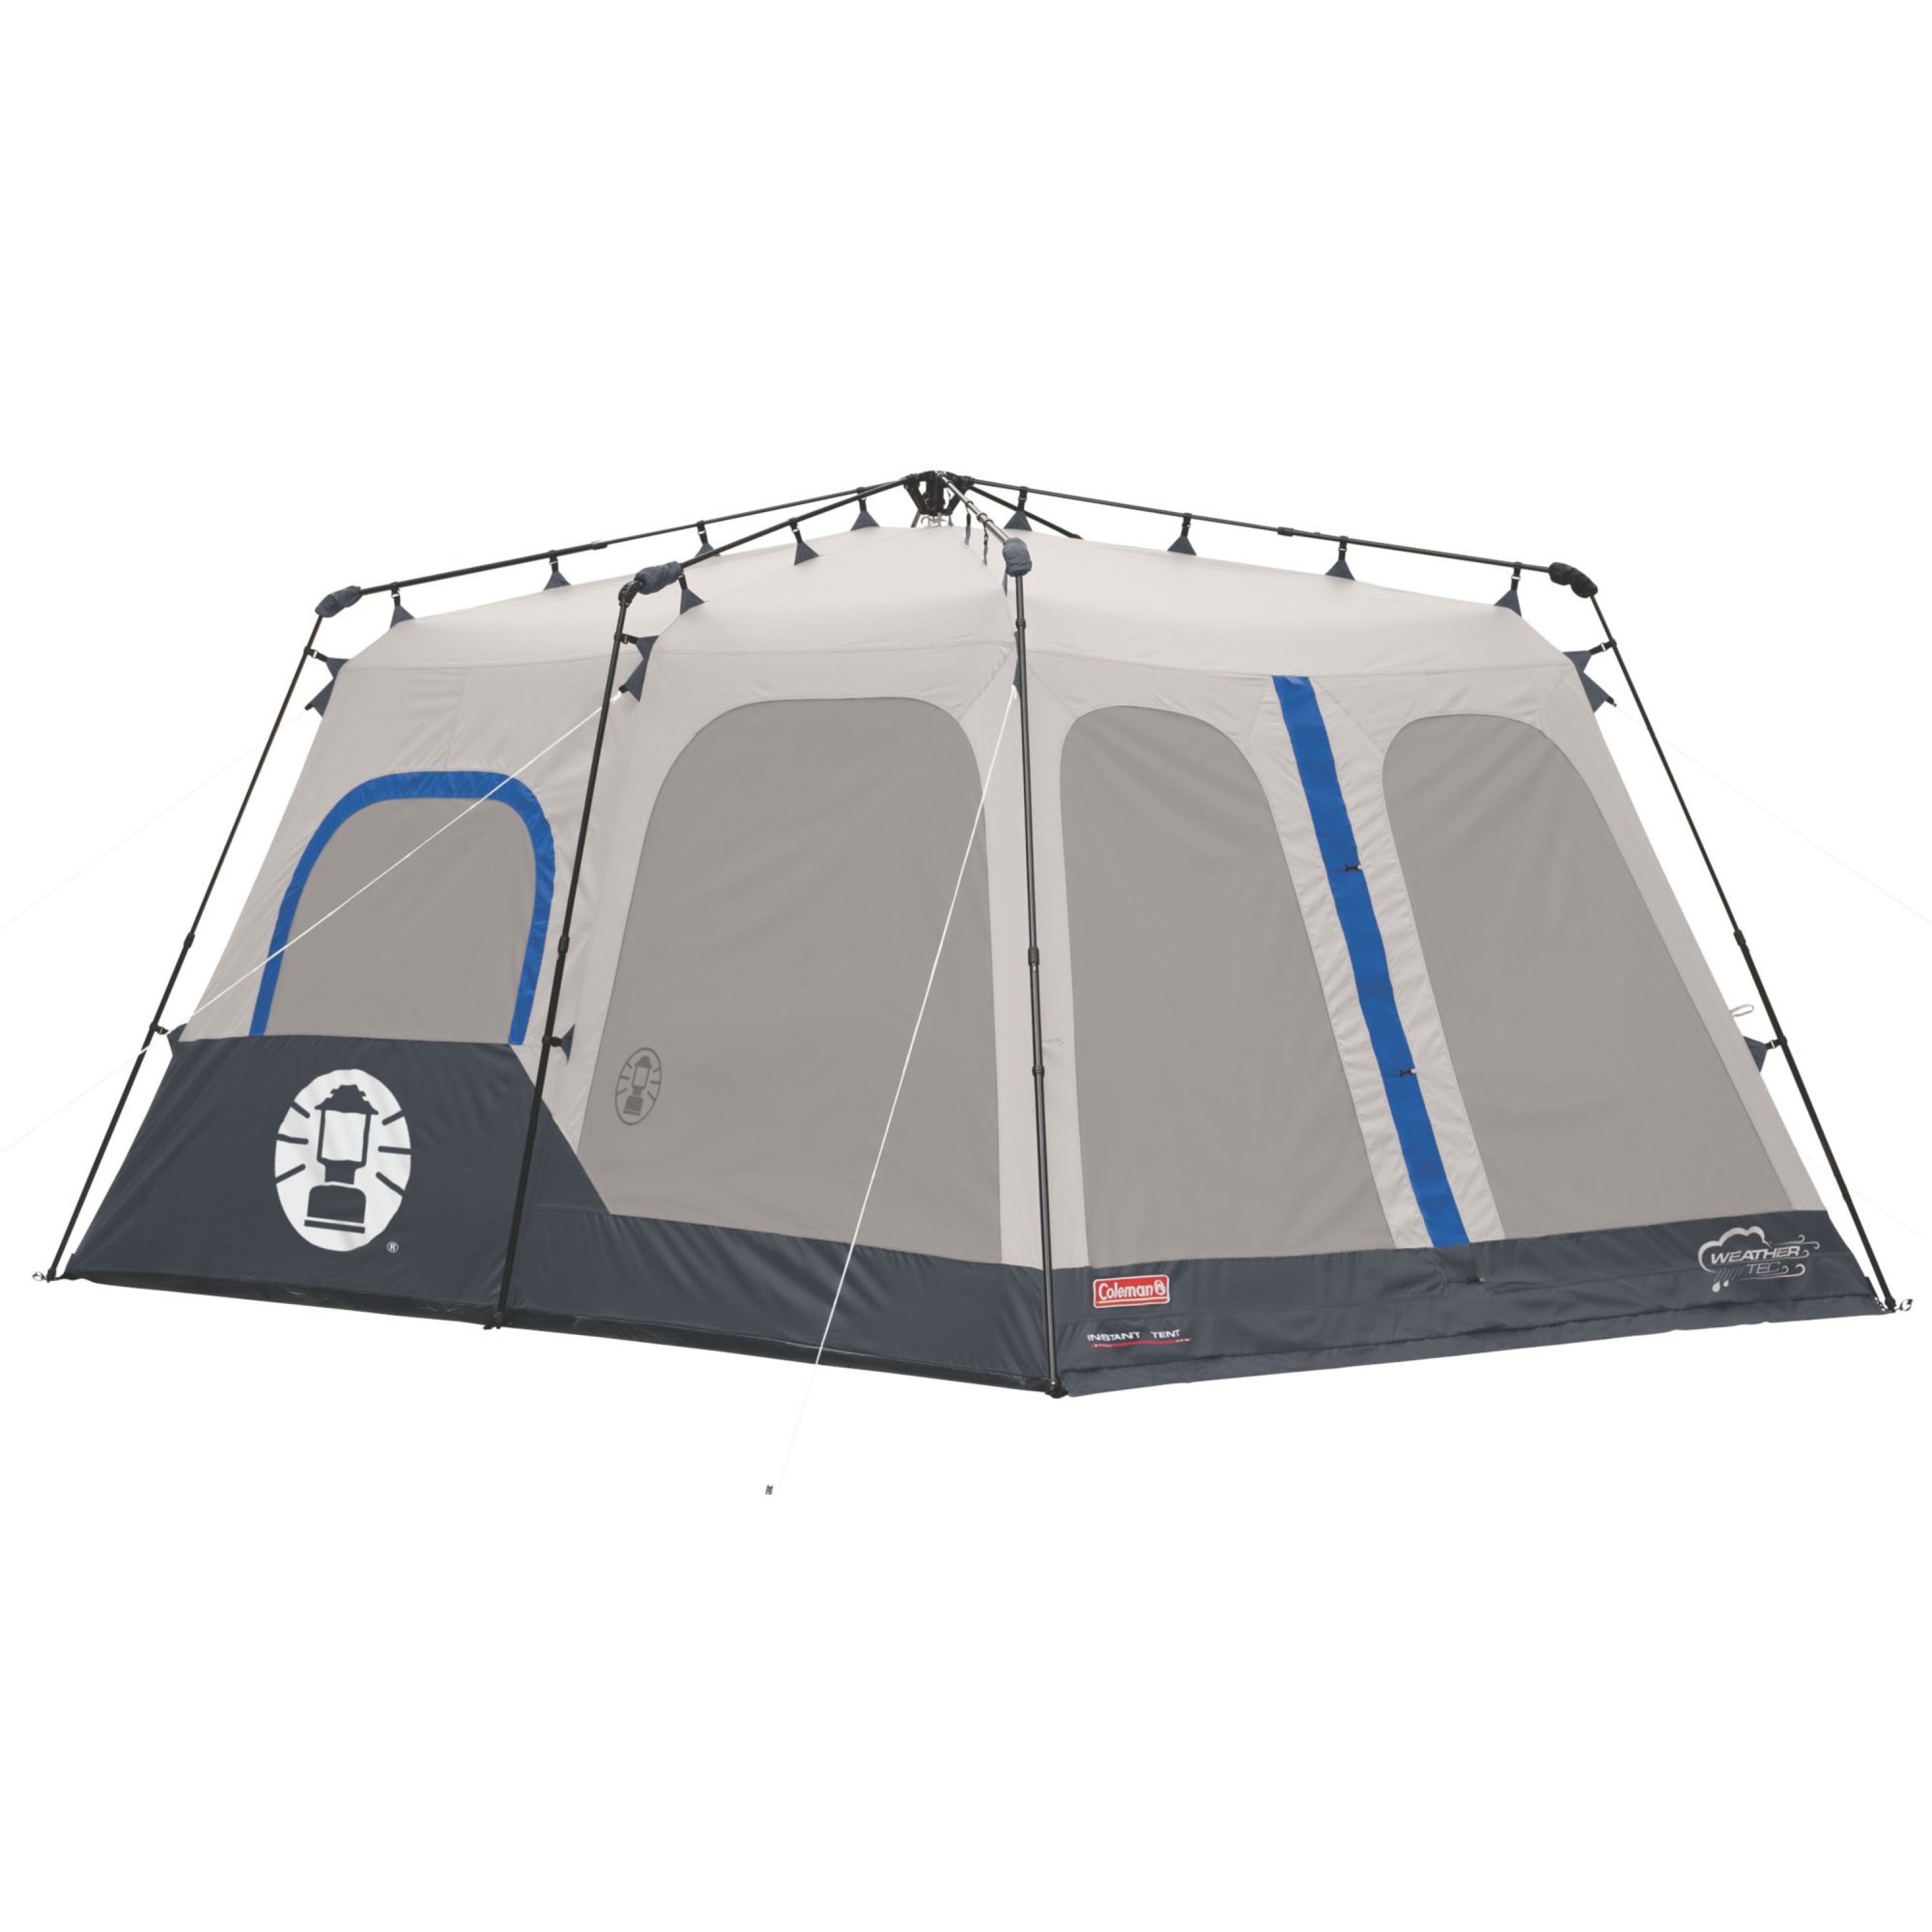 Coleman 8-Person Instant Tent - image 1 of 14